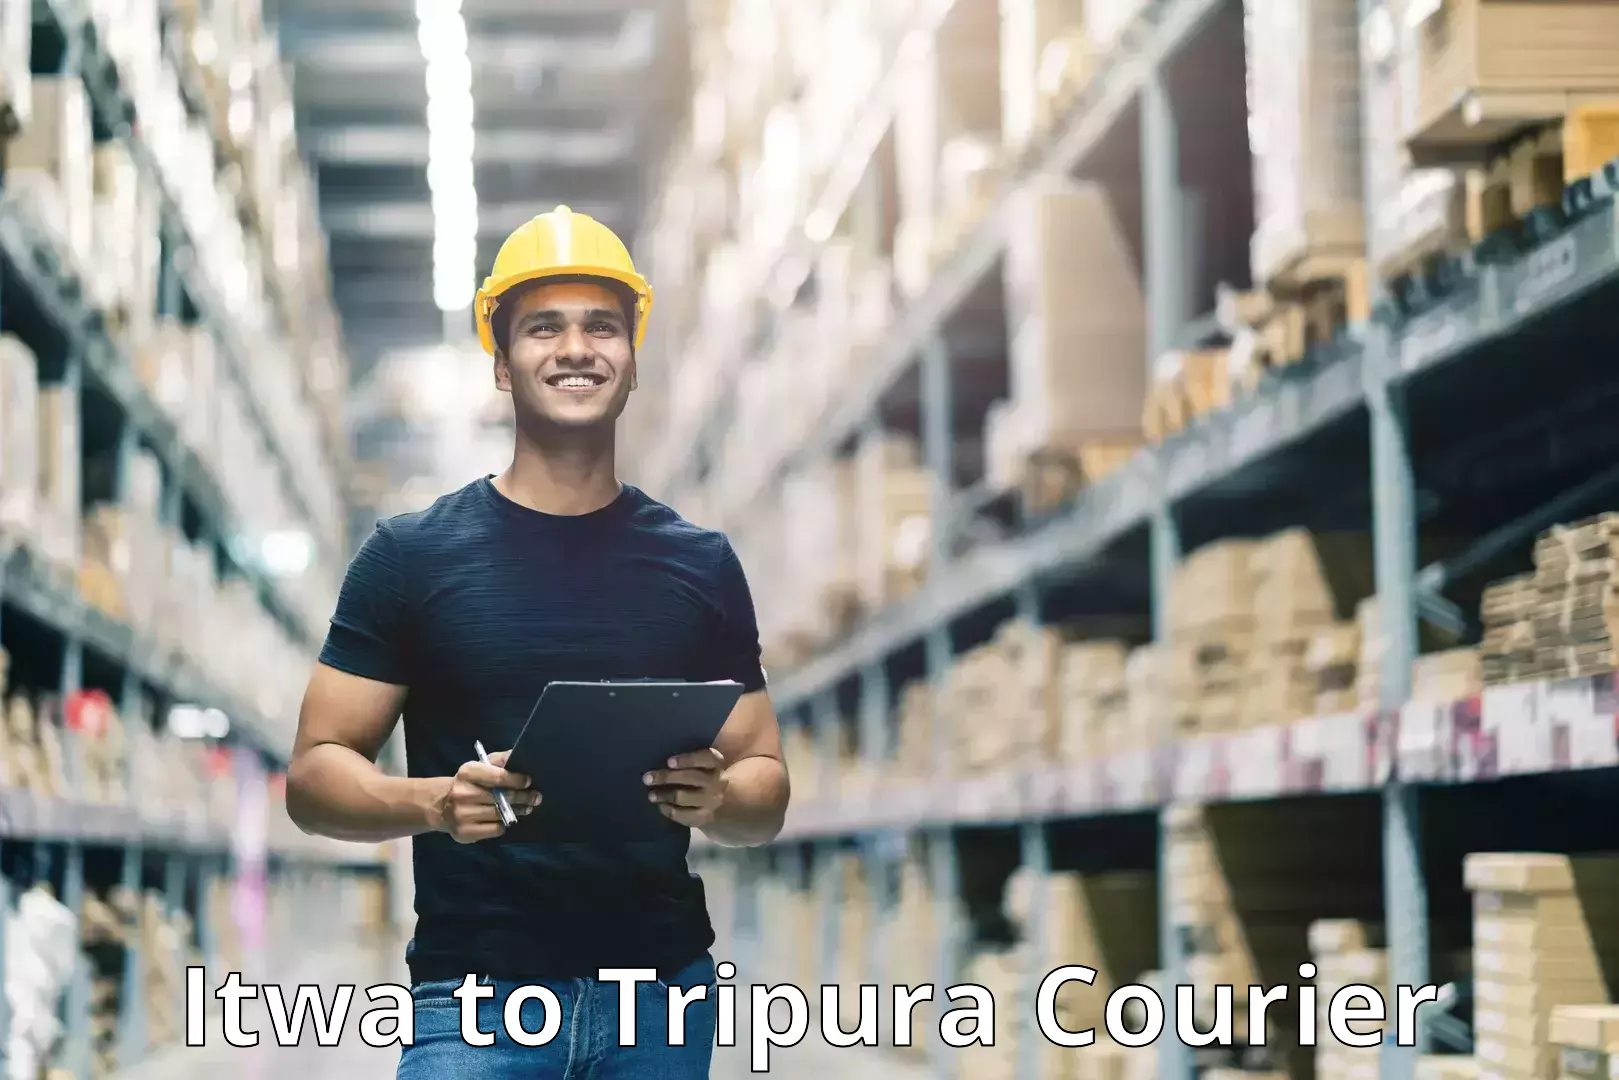 Express delivery capabilities Itwa to Tripura